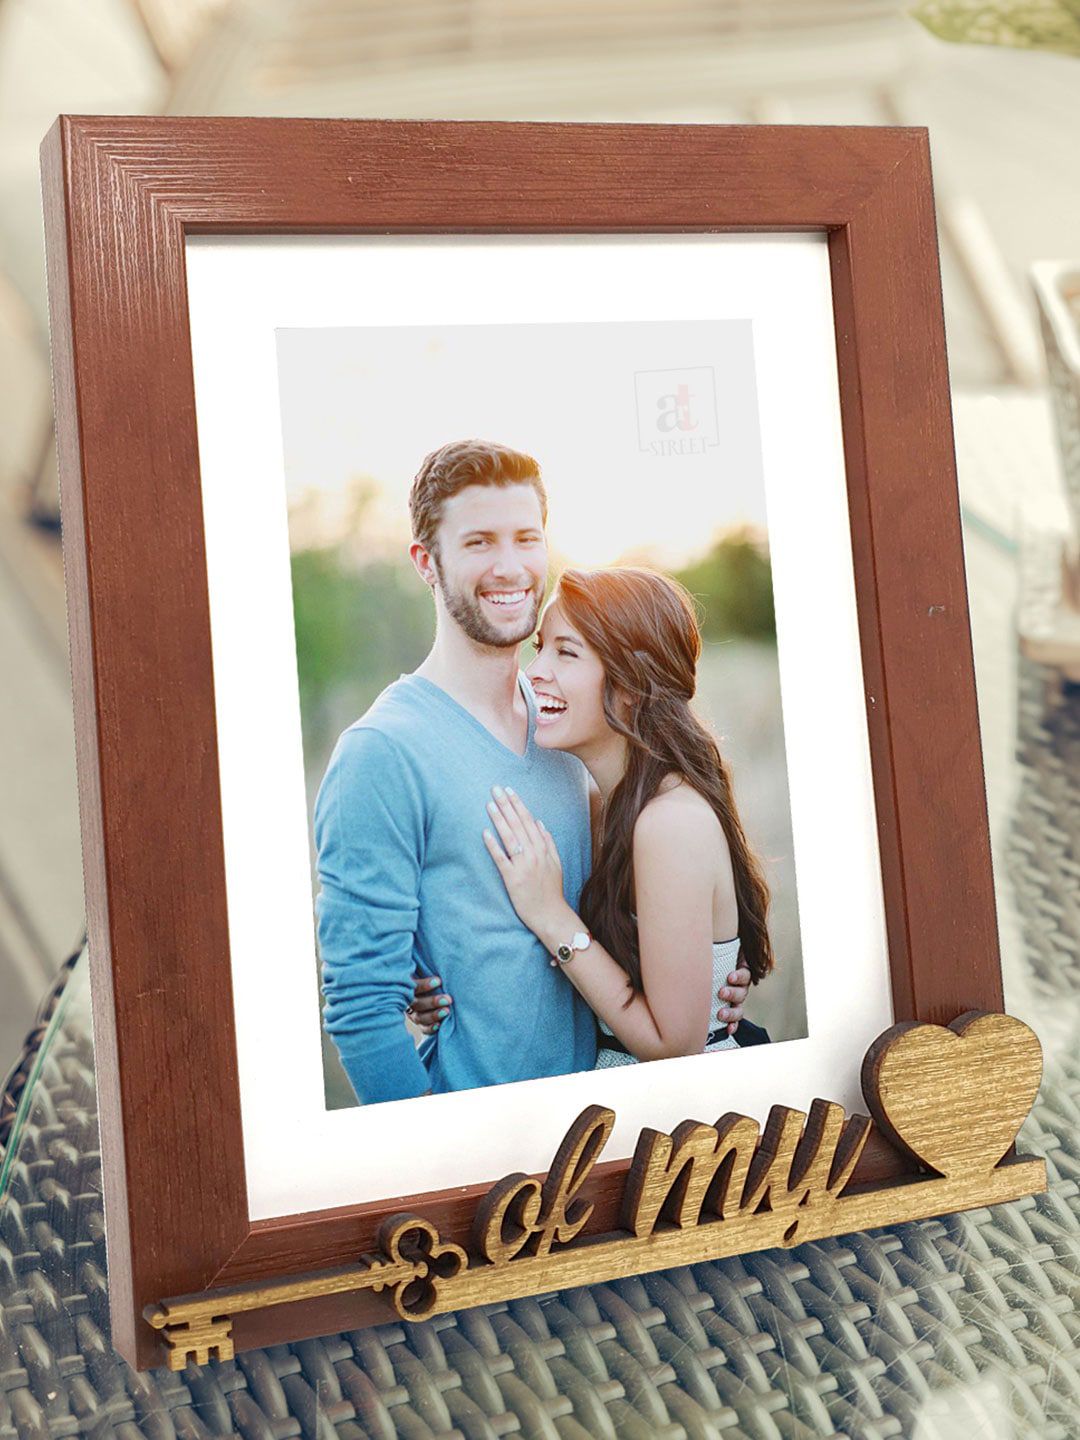 Art Street Unisex Brown & Beige Key Of My Love Individual Customize Table-Top Photo Frame Price in India